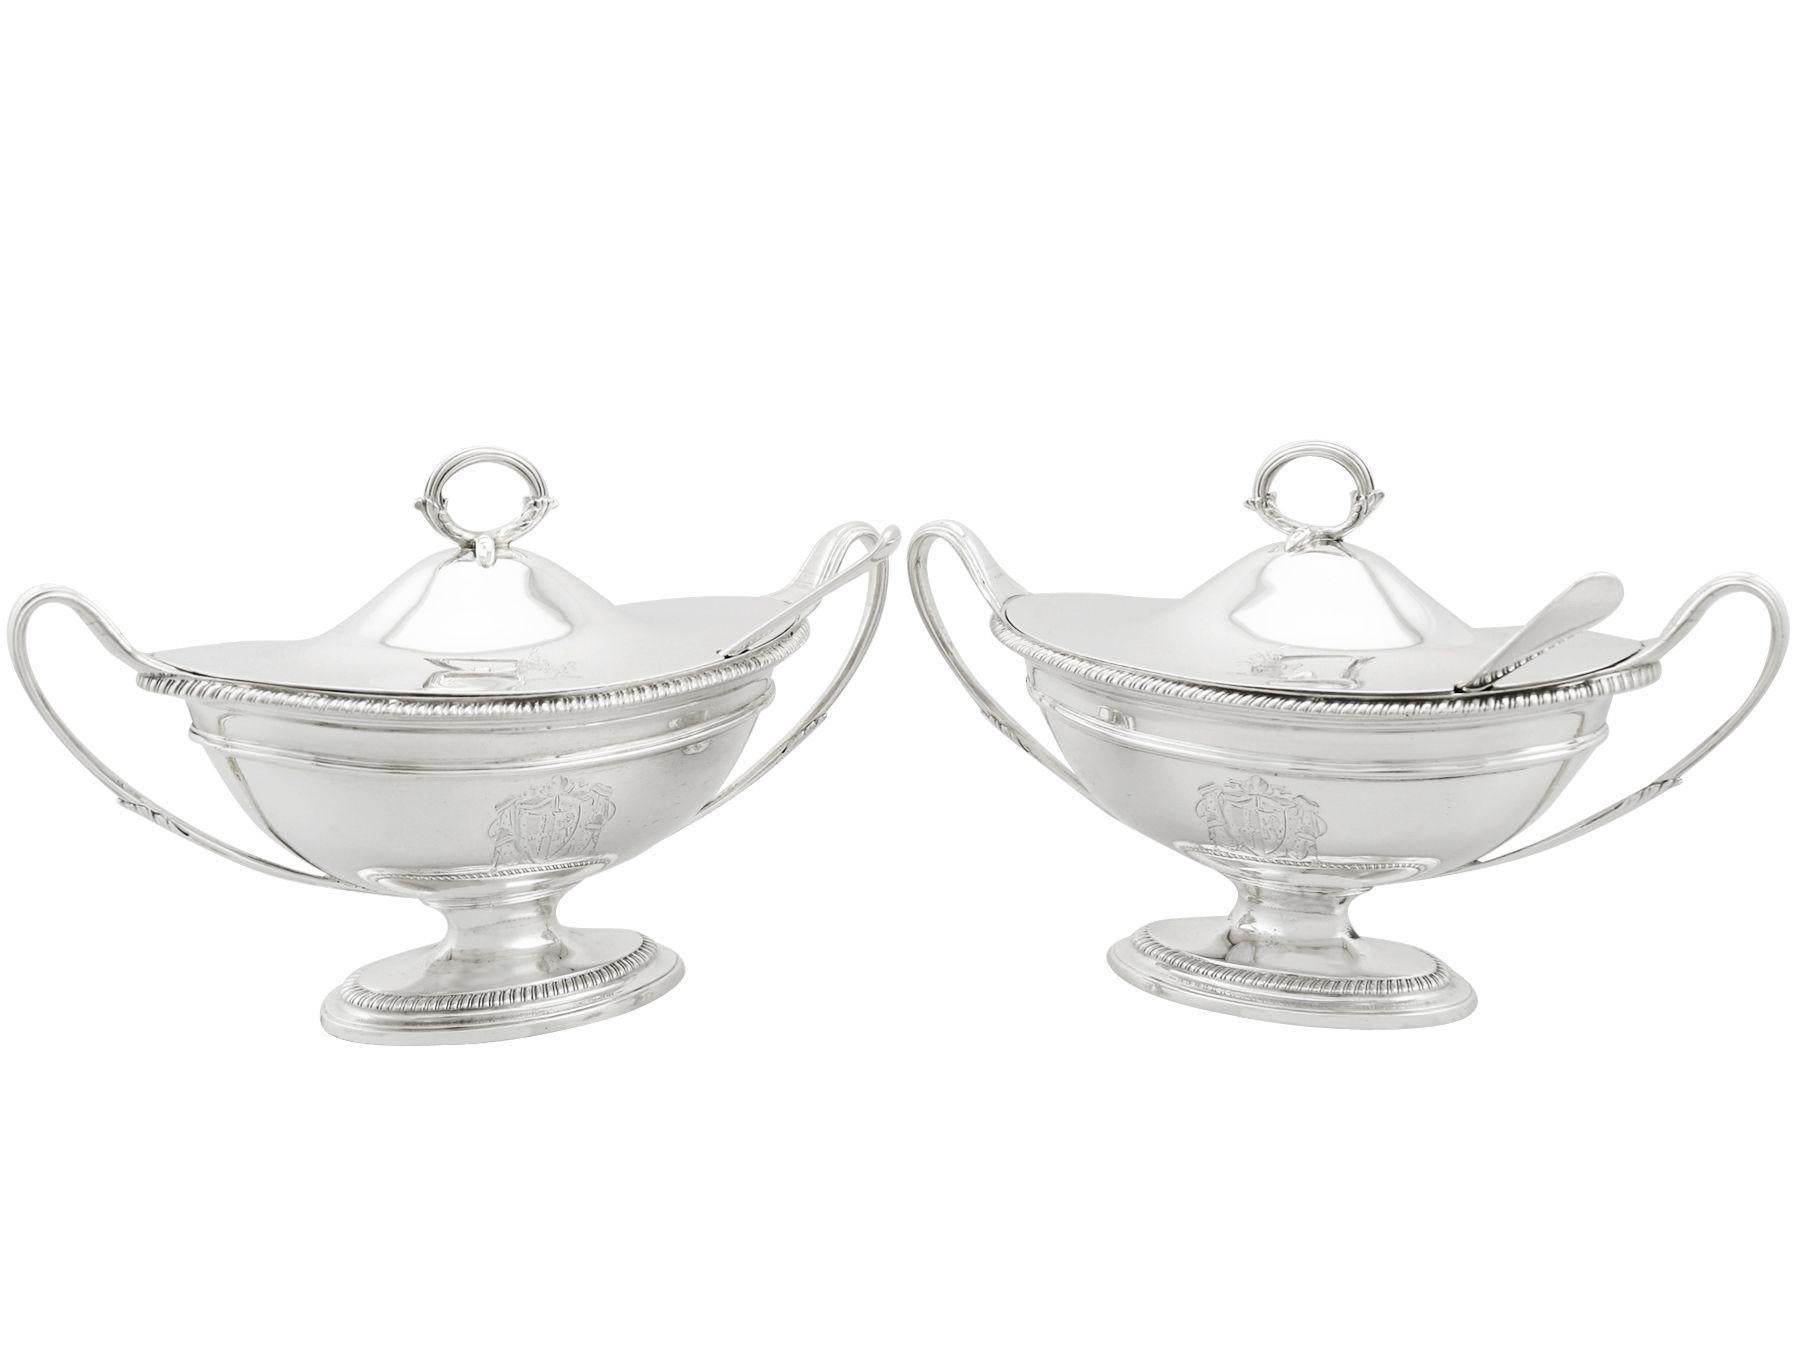 A exceptional, fine and impressive pair of antique George III English sterling silver sauce tureens with ladles; an addition to our Georgian silverware collection

These exceptional antique George III sterling silver sauce tureens have a plain